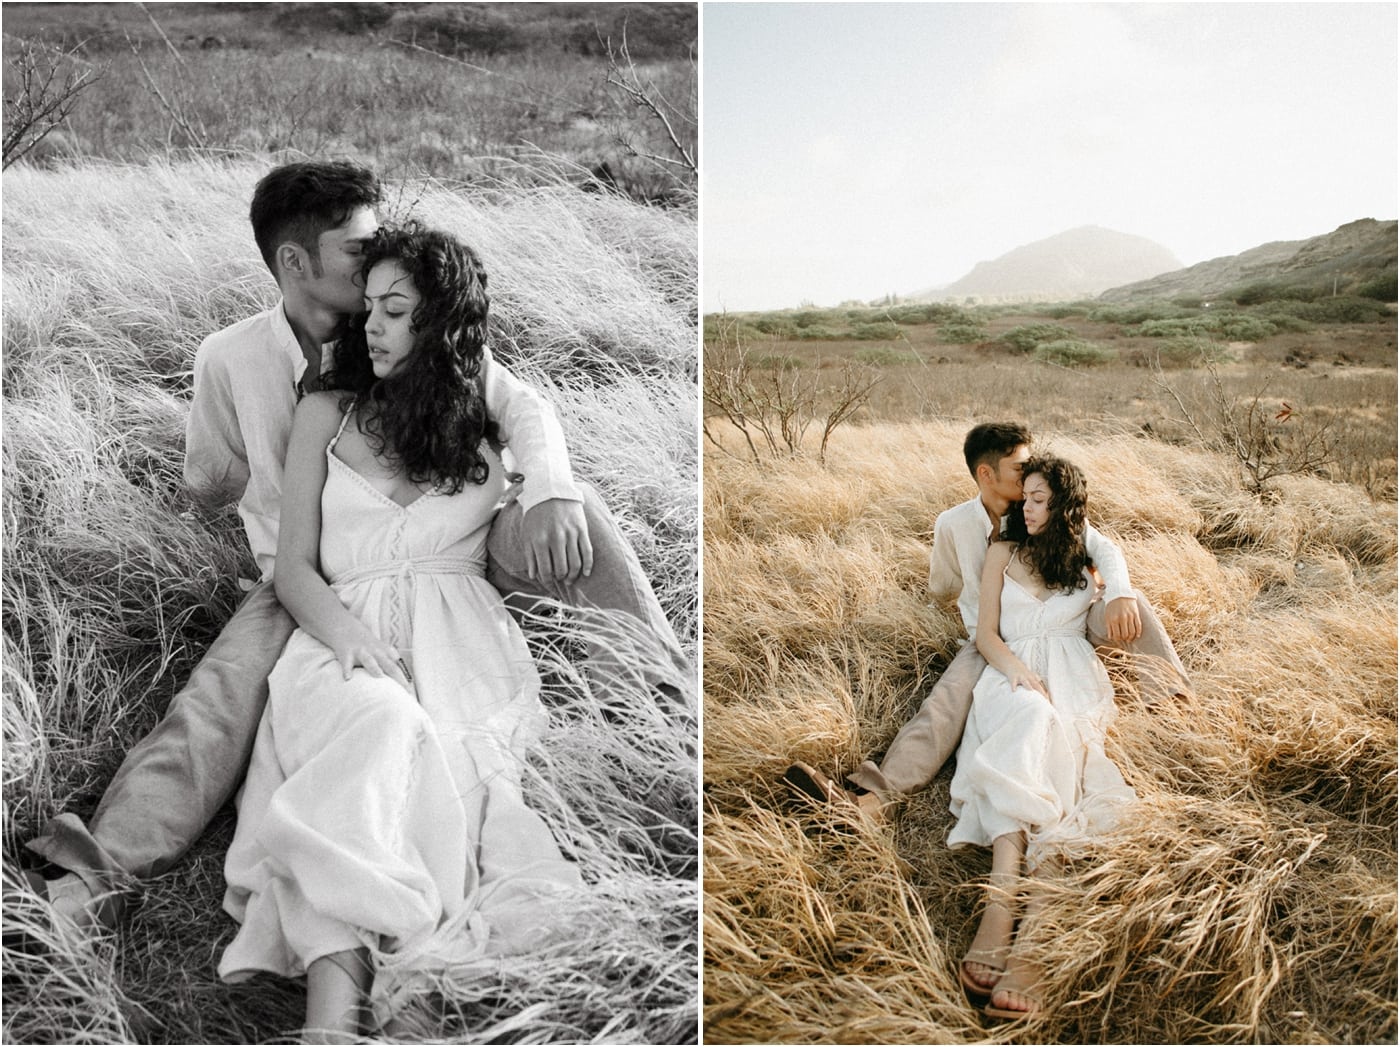 Adventure elopement photography by Emily Choy